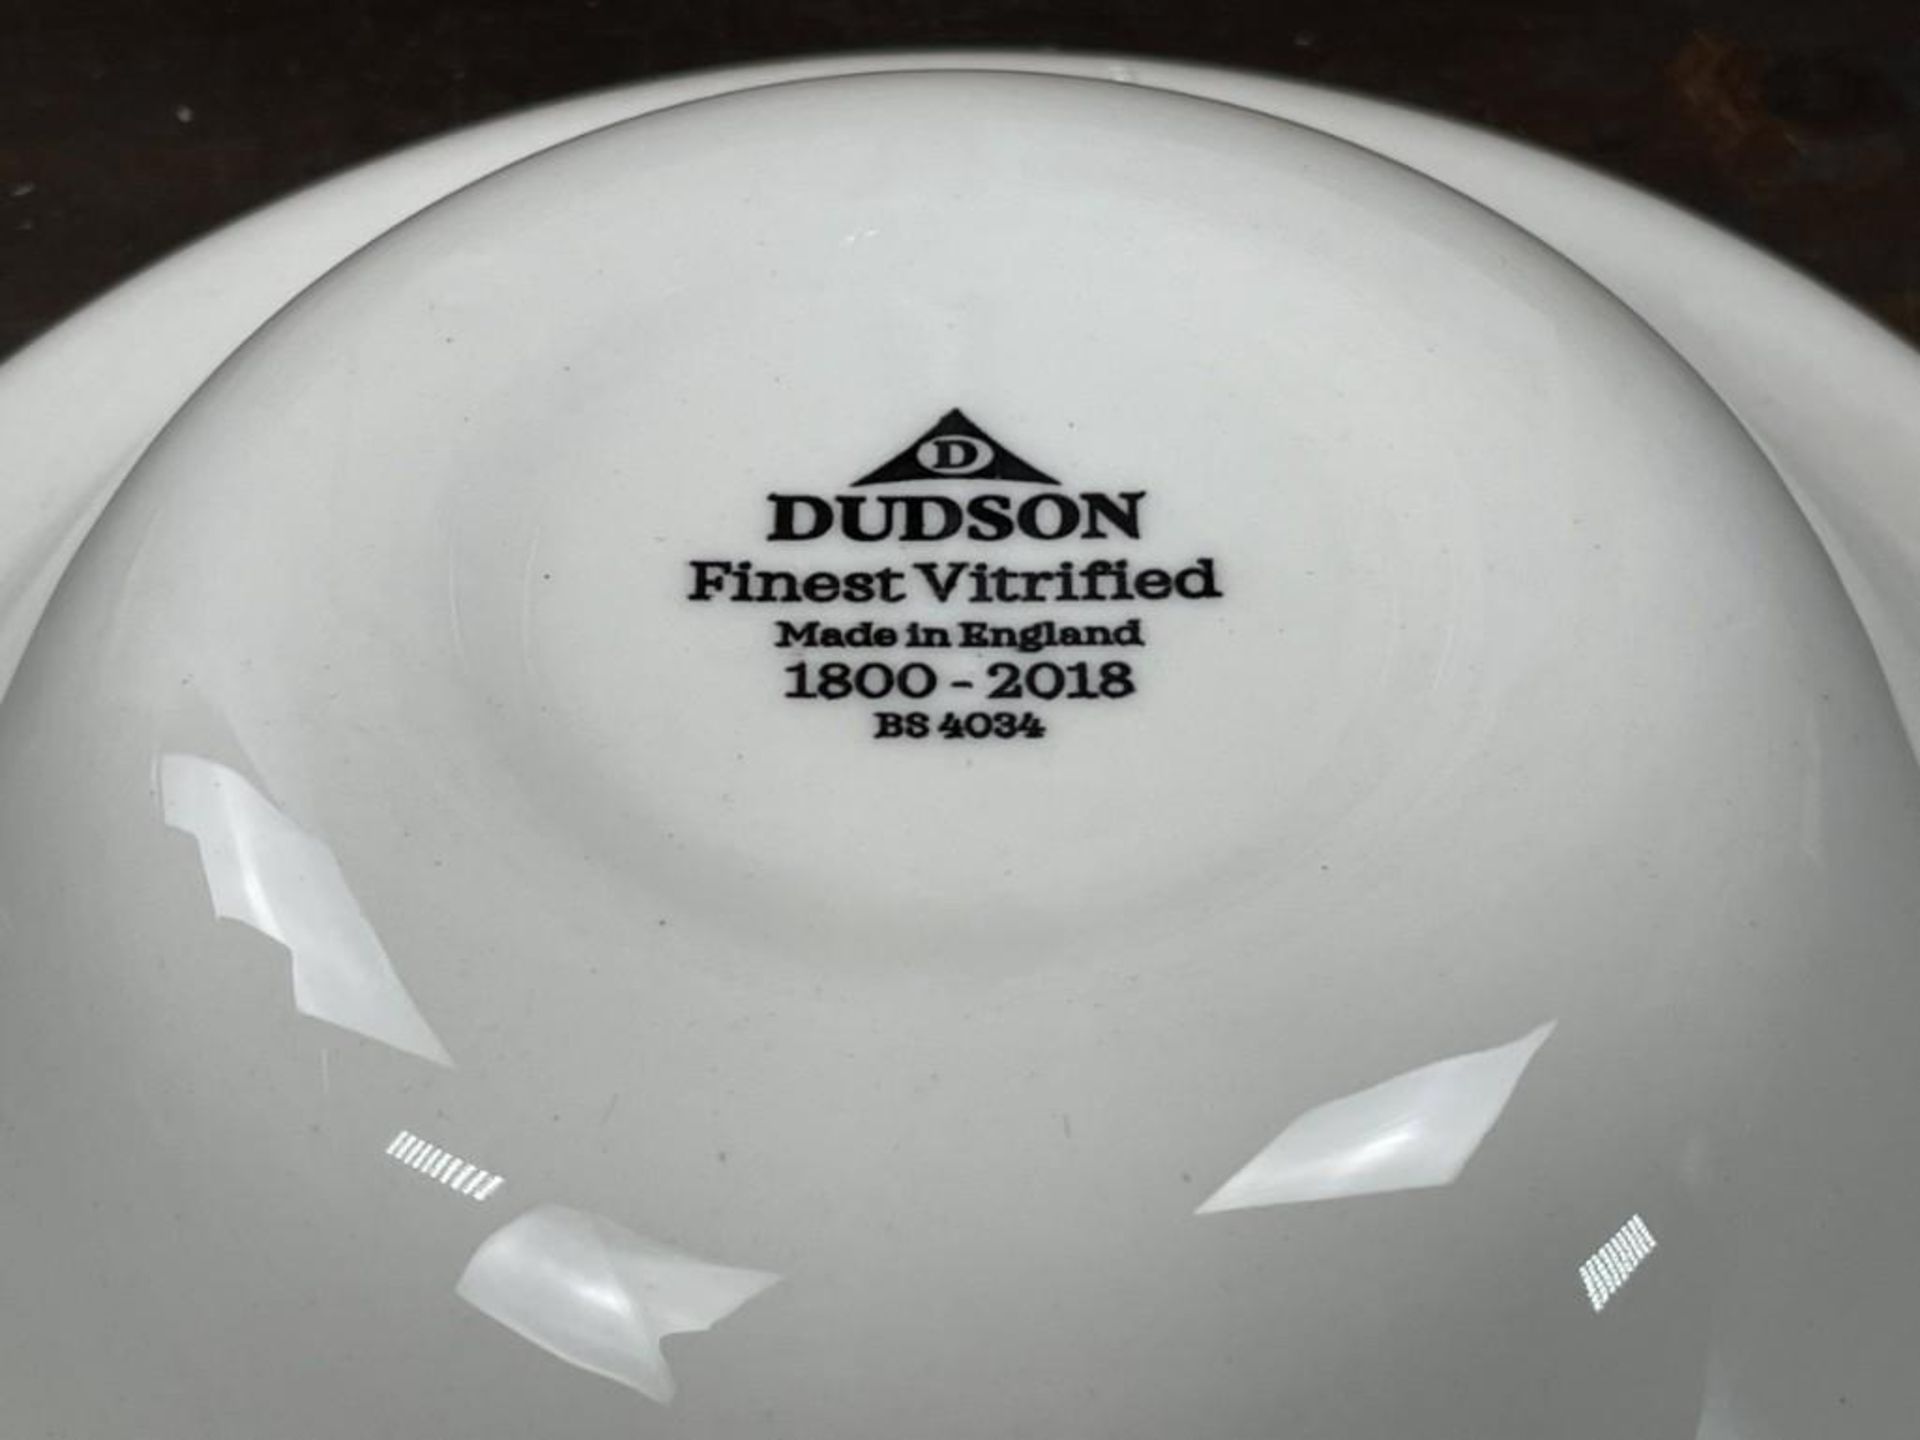 DUDSON CLASSIC 6-3/8" OATMEAL BOWLS - LOT OF 72 (2 CASES) - Image 3 of 5